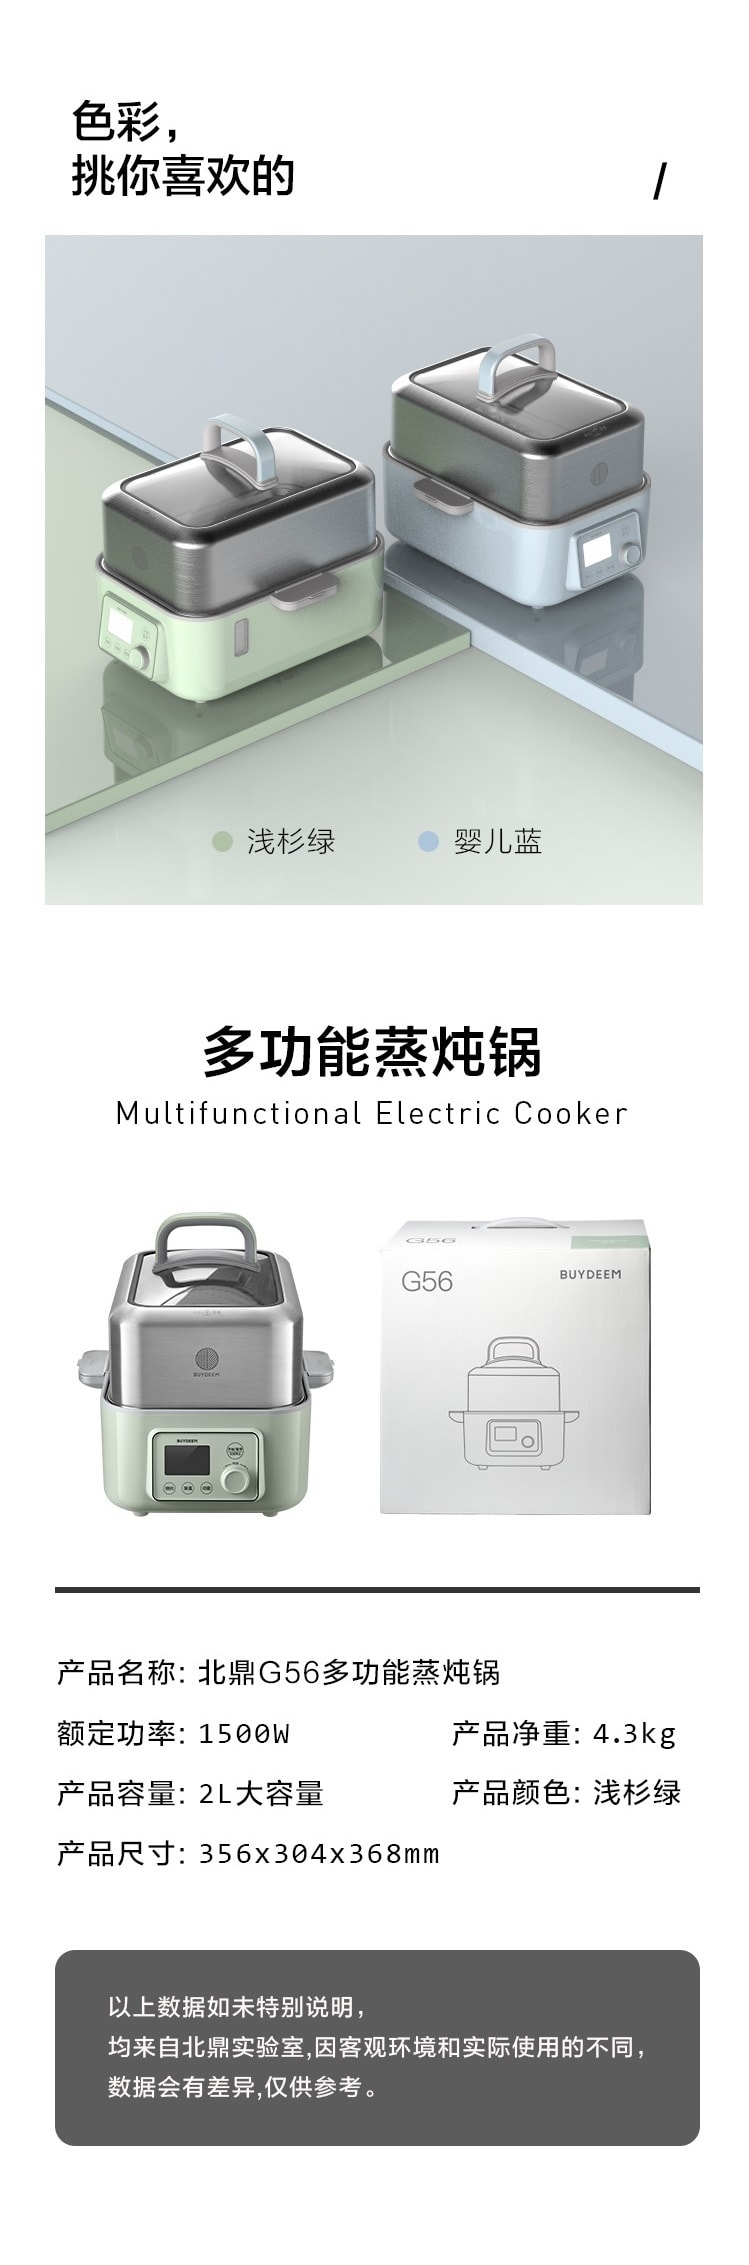 G563 Electric Food Steamer one touch vegetable Steamer Green